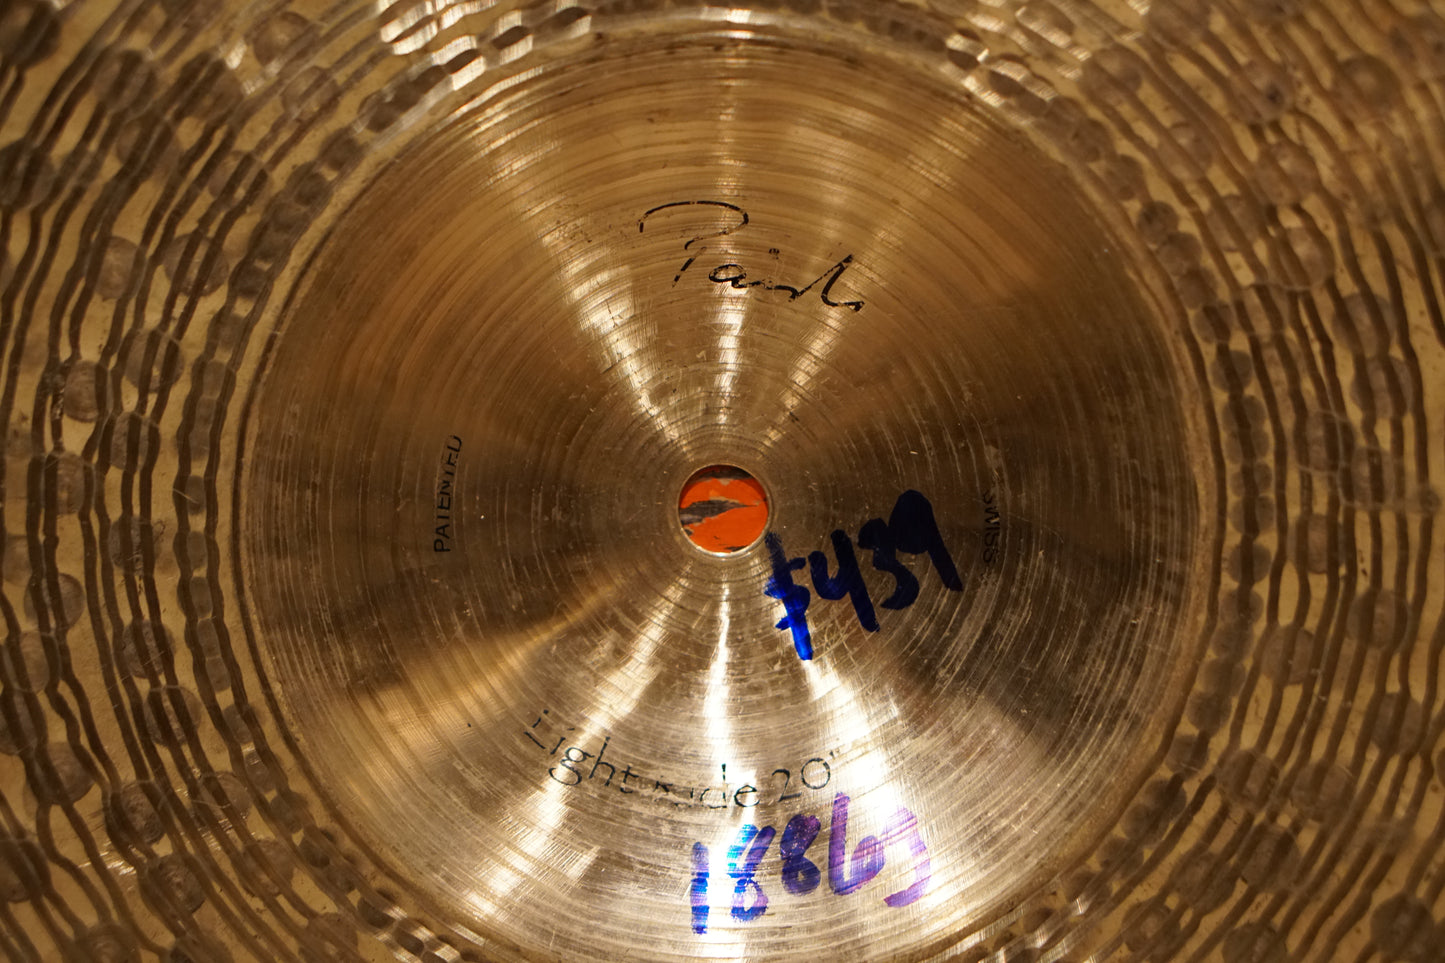 Paiste 20" Signature Traditionals Light Ride Cymbal - 1886g